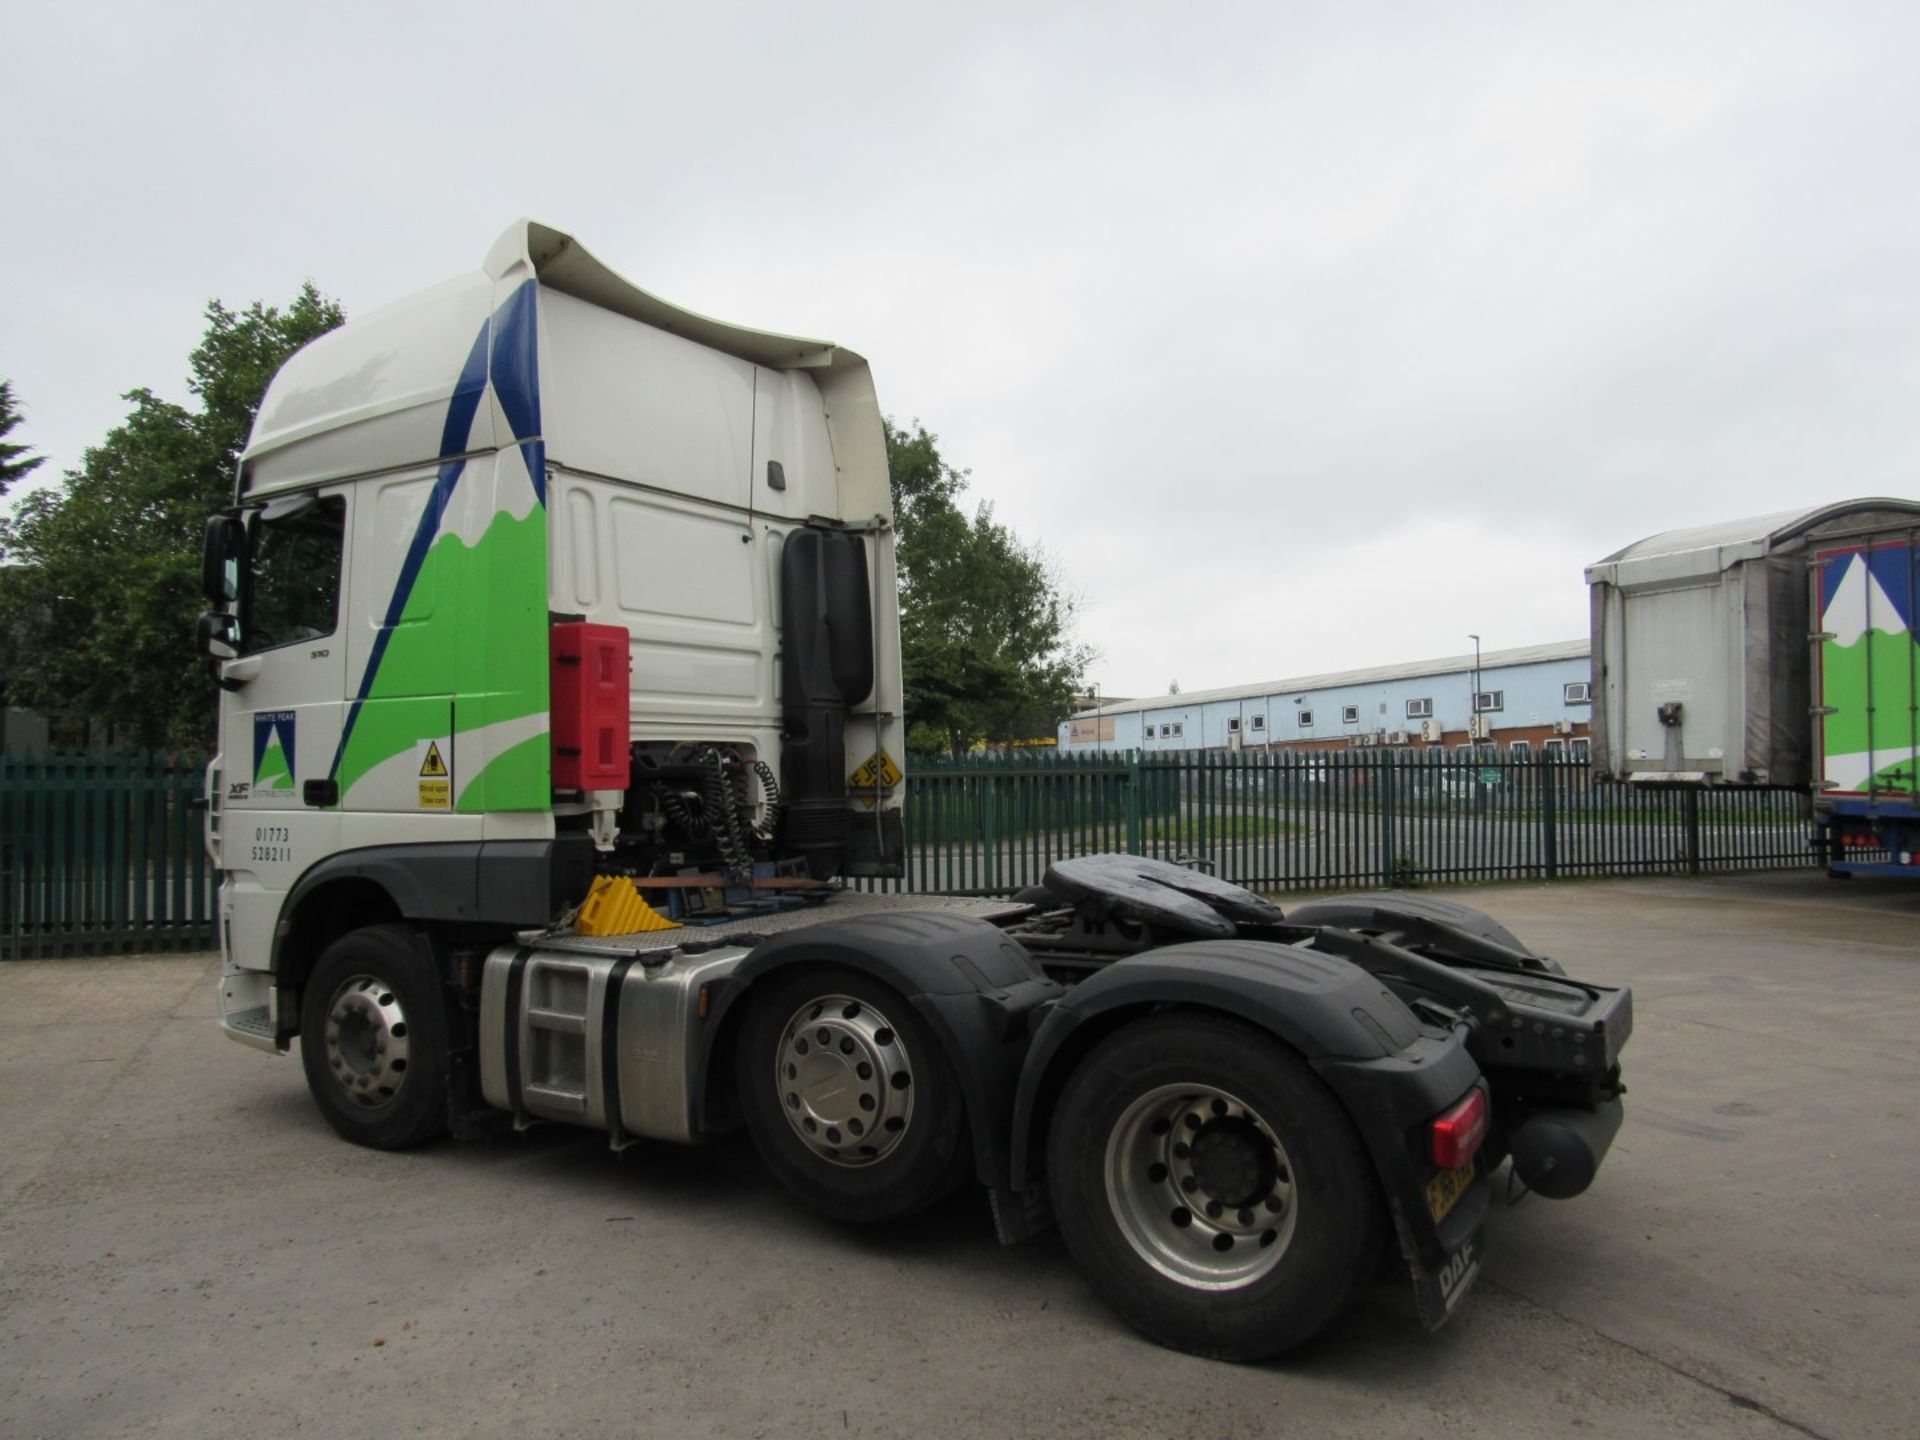 Daf FTG XF:510 6x2 Euro 6 Super space cab tractor - Image 5 of 22